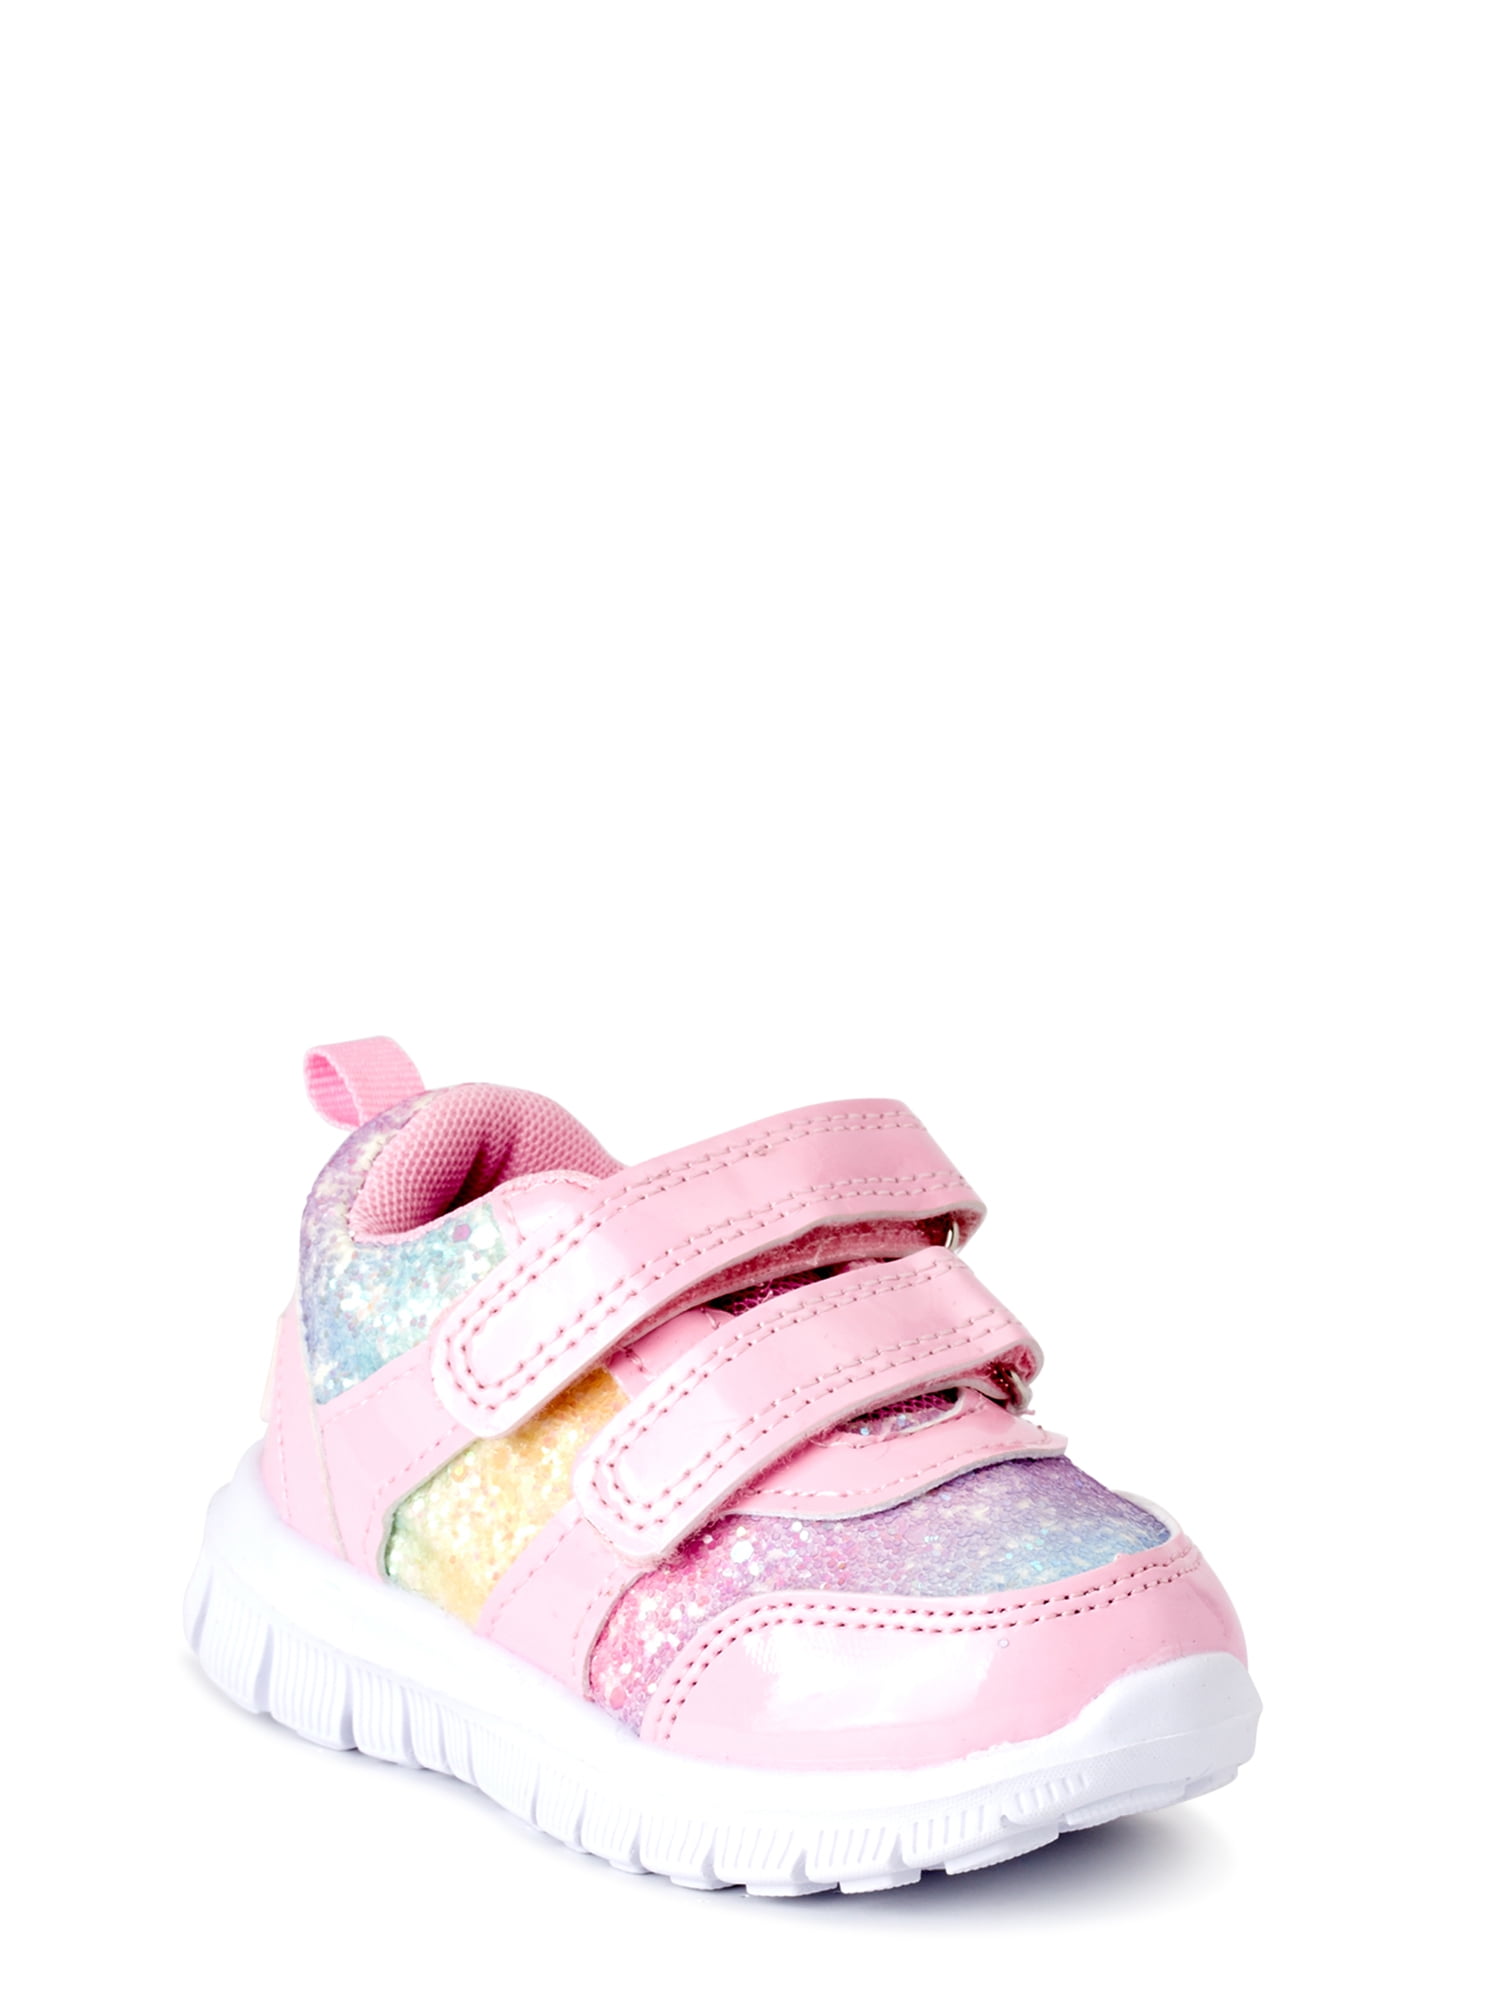 infant girl tennis shoes